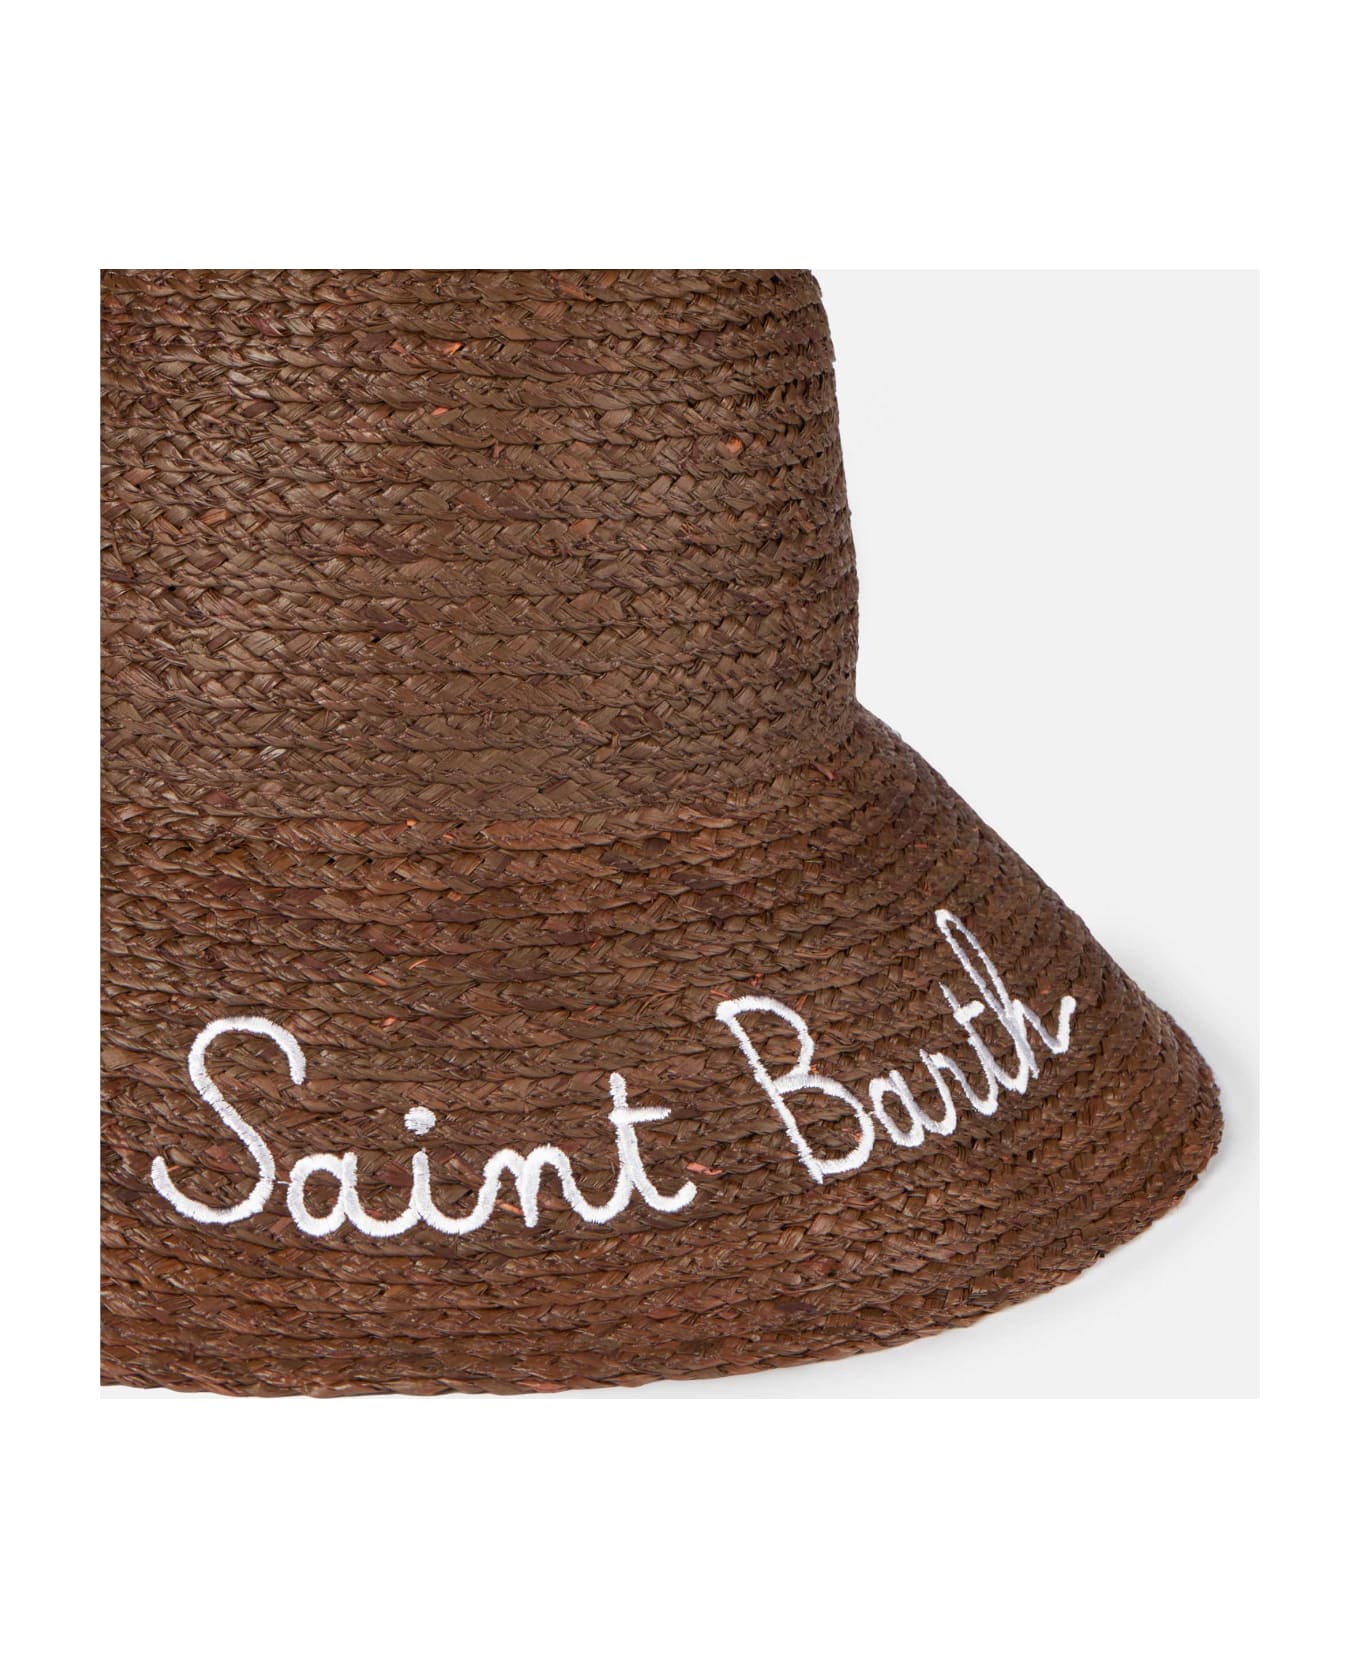 MC2 Saint Barth Woman Straw Light Brown Bucket With Front Embroidery - BROWN